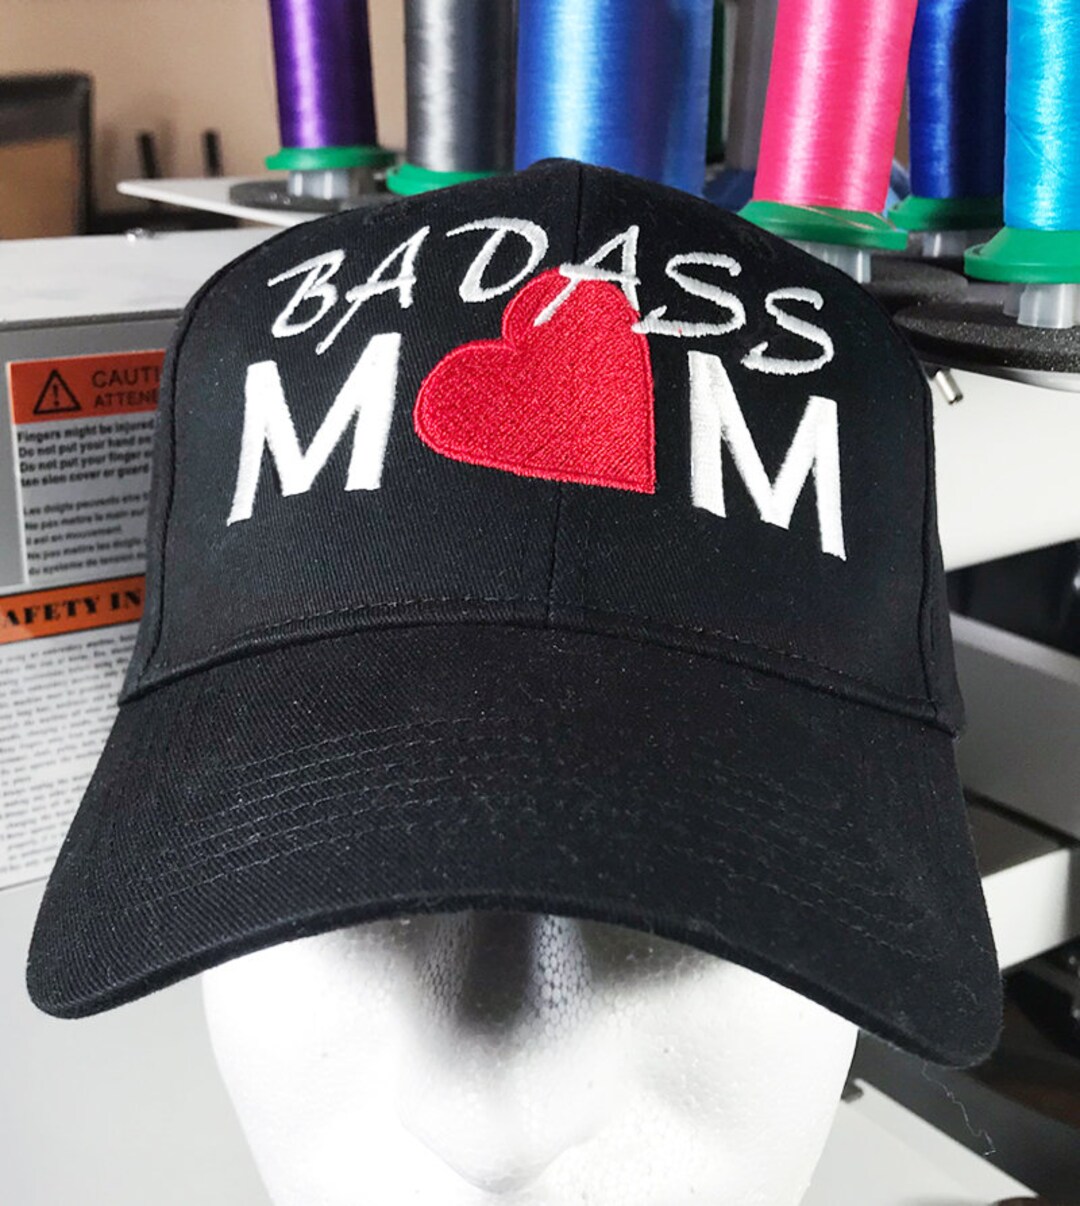 Badass Mom Embroidered Cap for The Best Mother Ever.